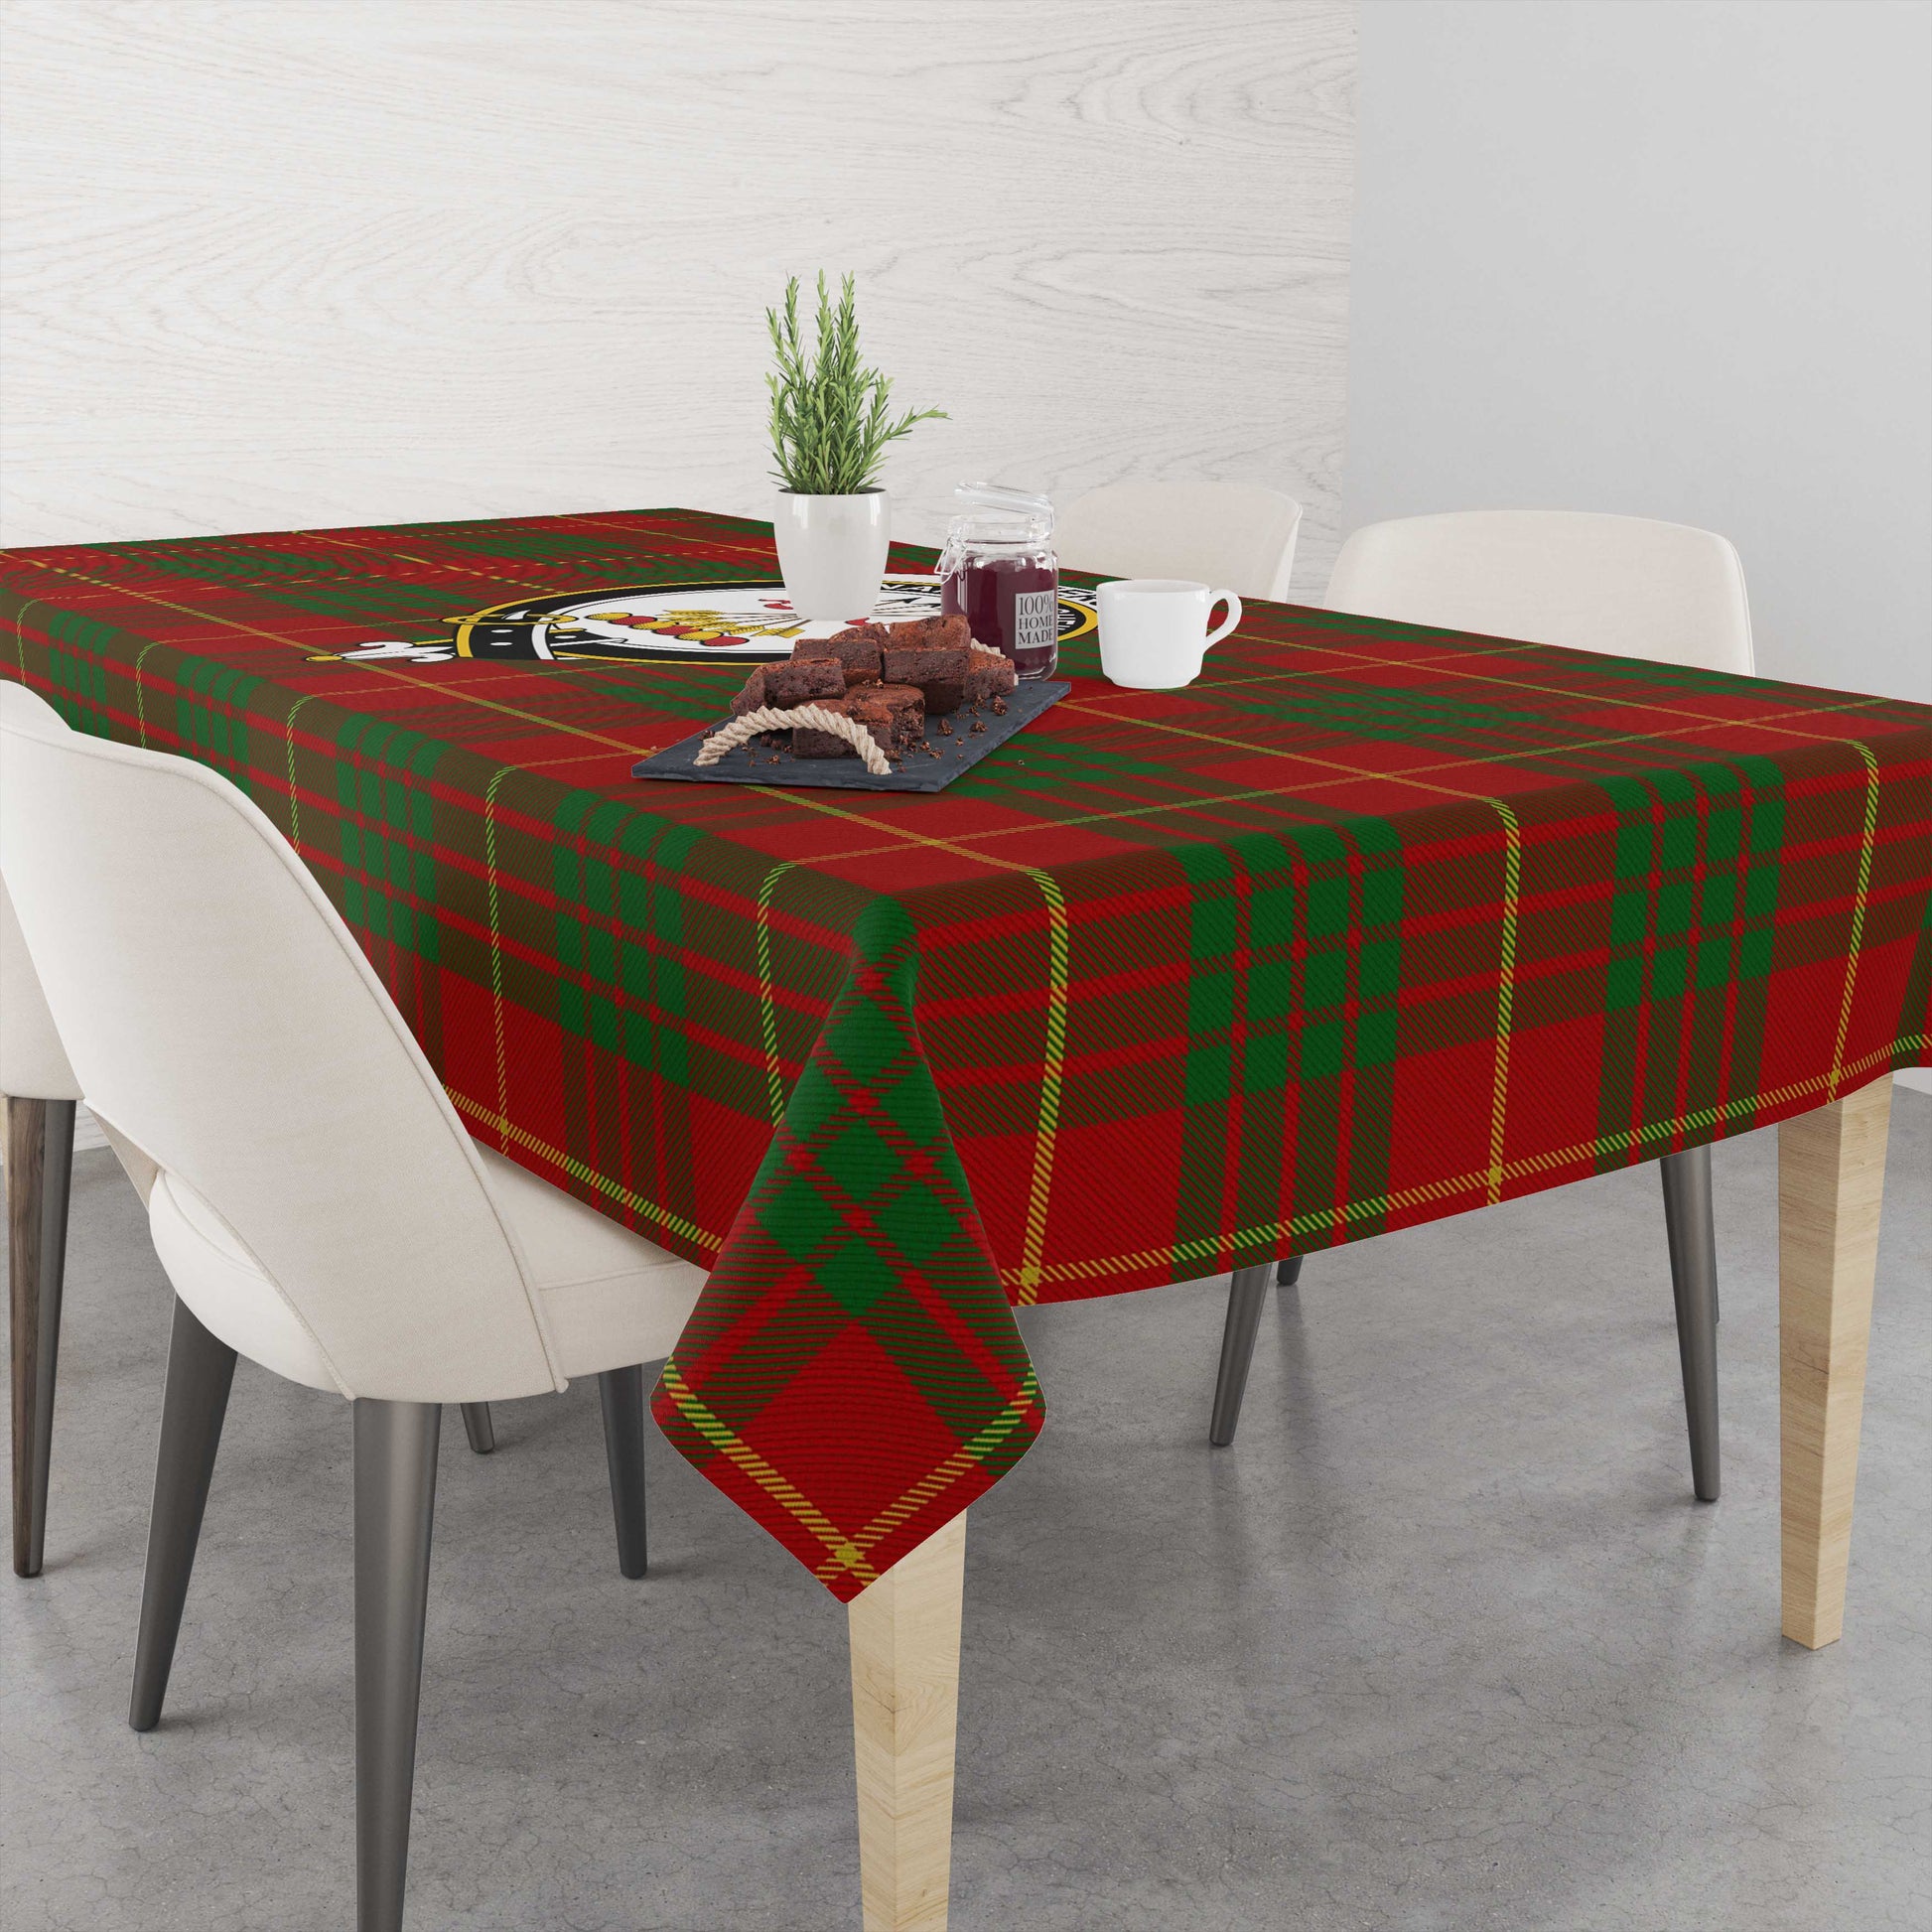 cameron-tatan-tablecloth-with-family-crest